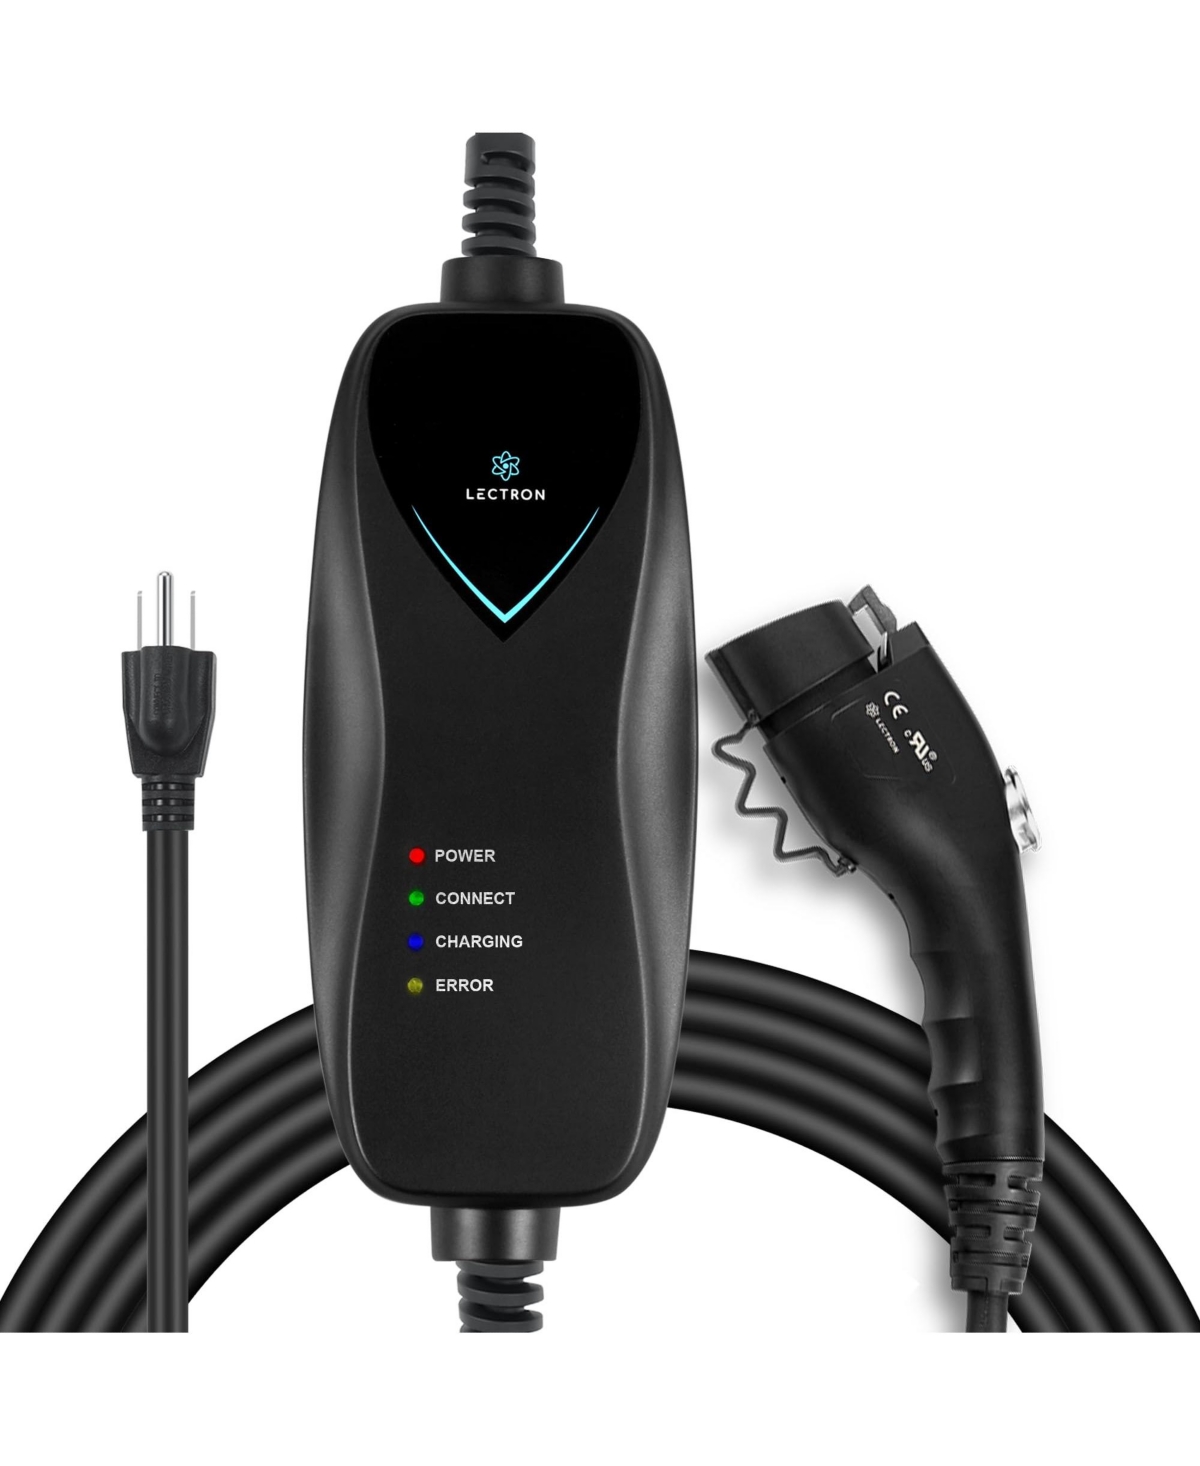 Lectron Level 1 Ev Charger With Nema 5-15 Plug 15 Amp - J1772 Electric Car Charger In Black